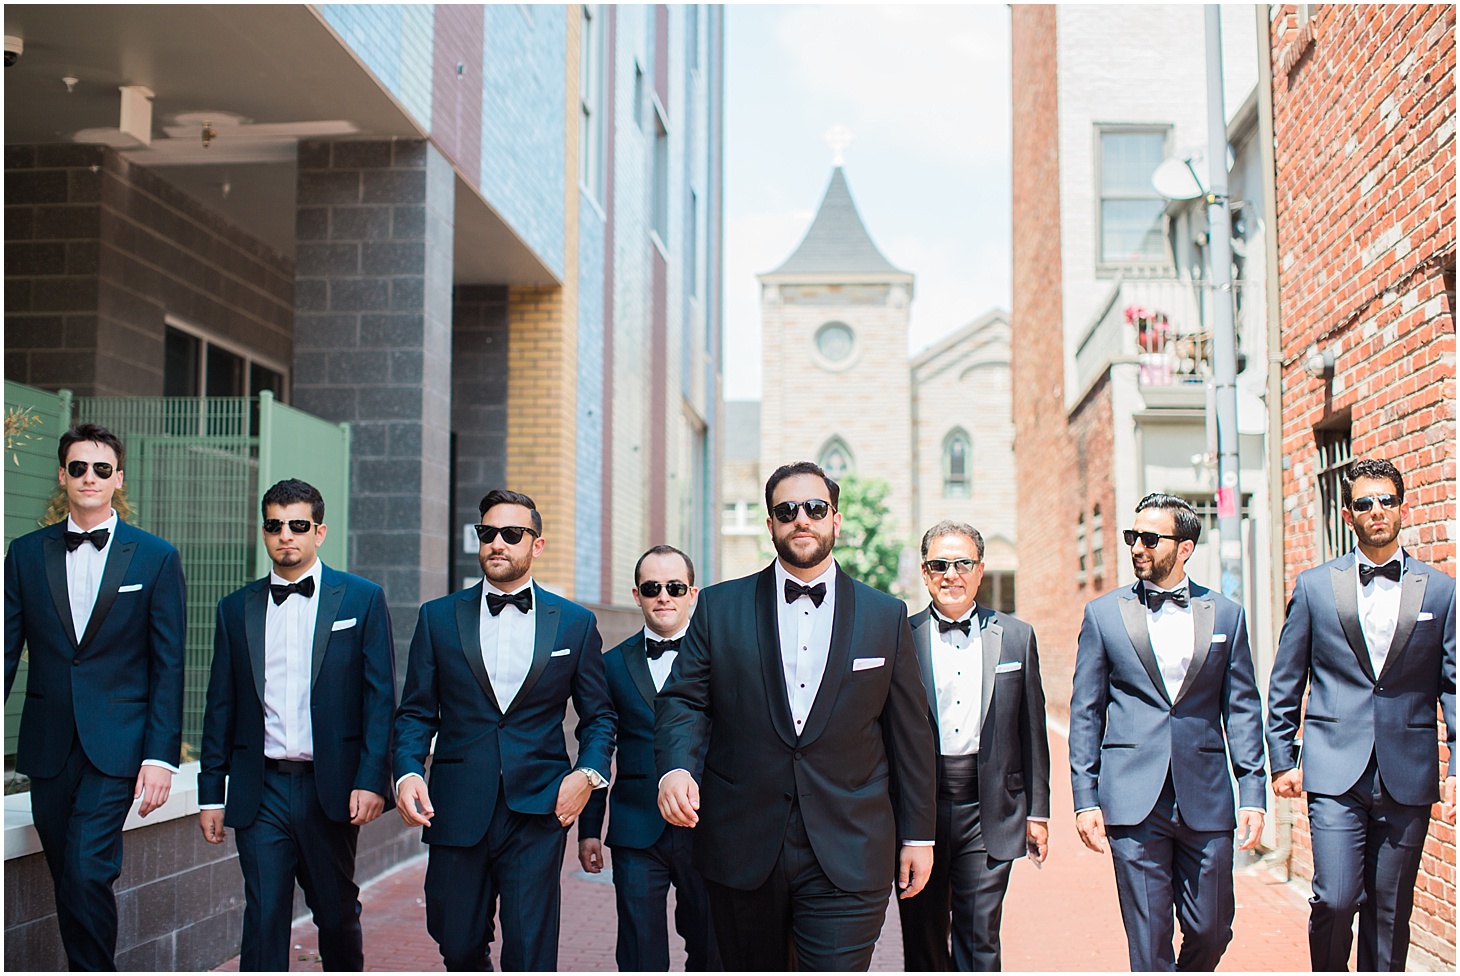 Oliver Wicks and Black Tux Groom and Groomsmen Suits | Interfaith DC Wedding by Sarah Bradshaw Photography